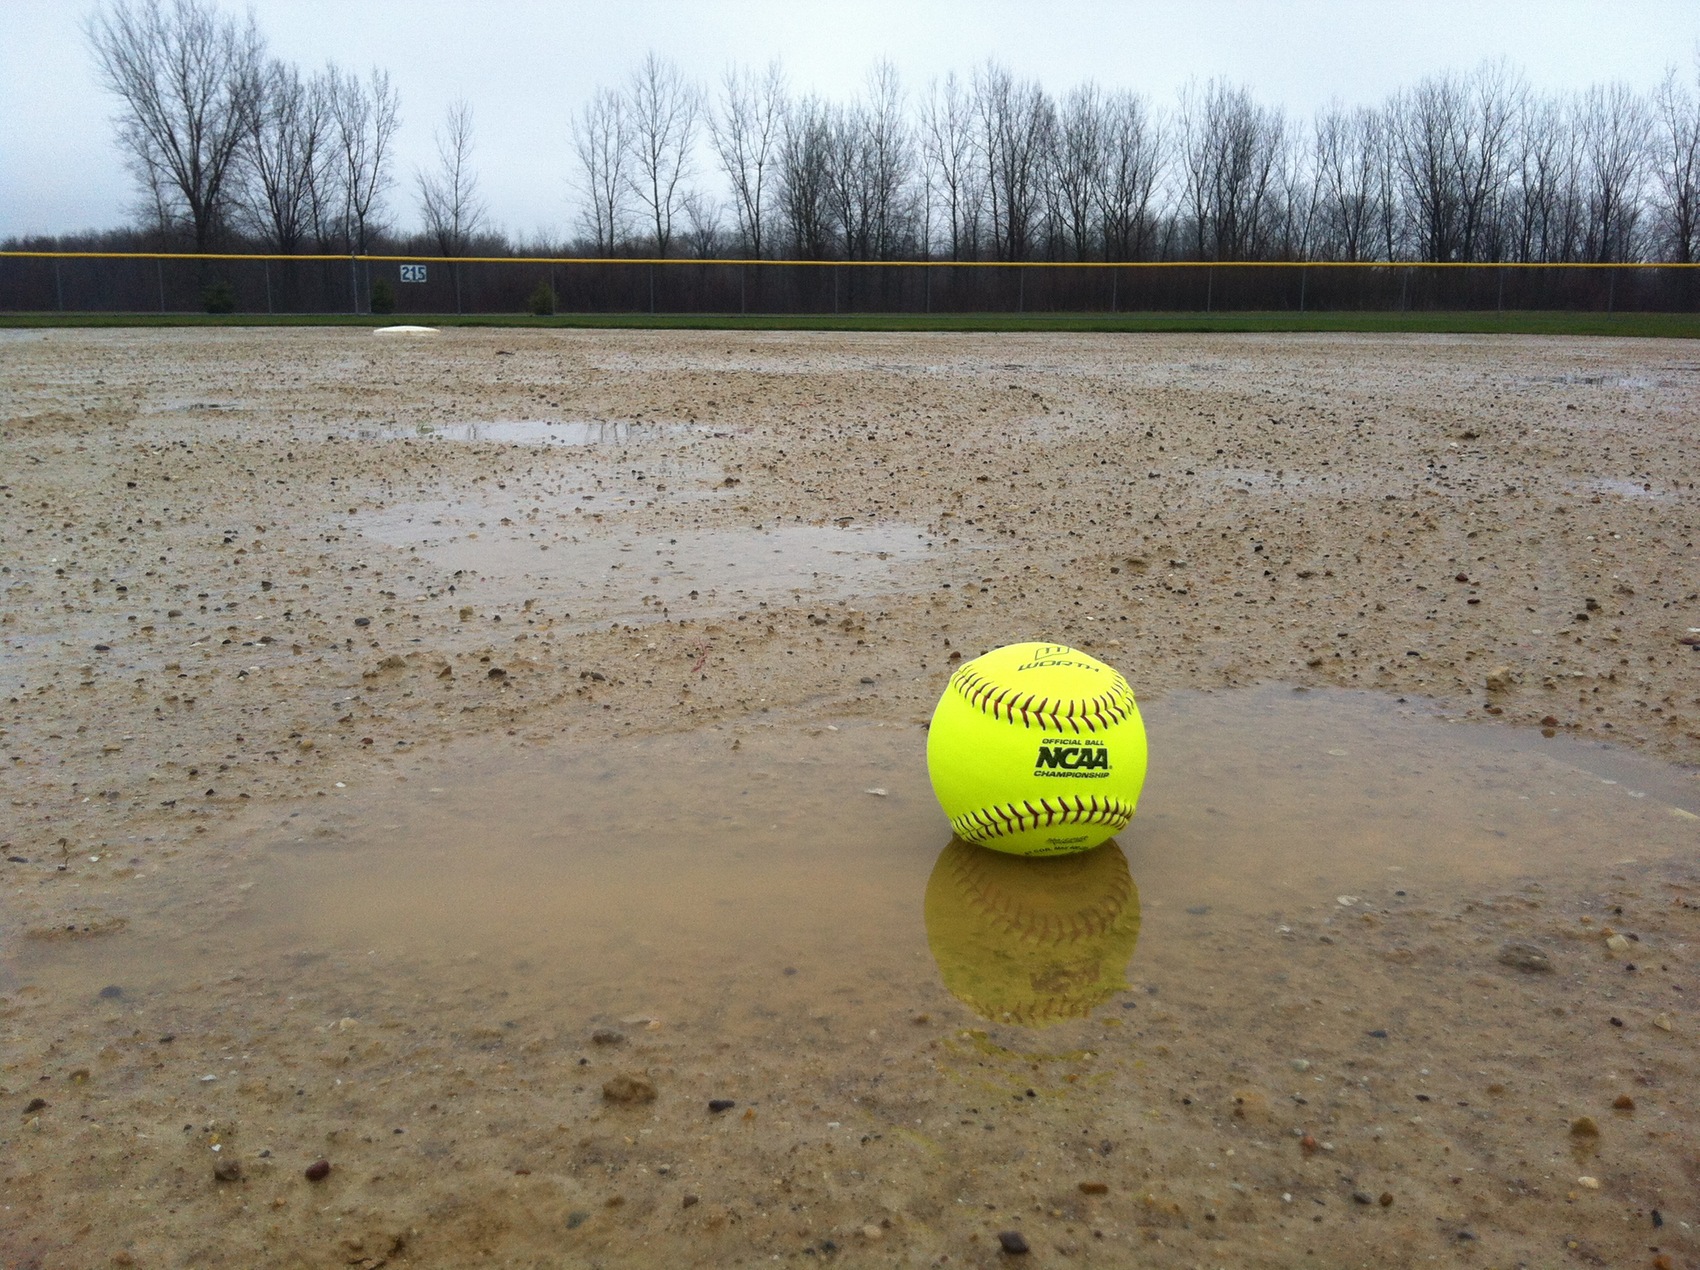 CANCELED: 4/26 Softball at Northland College